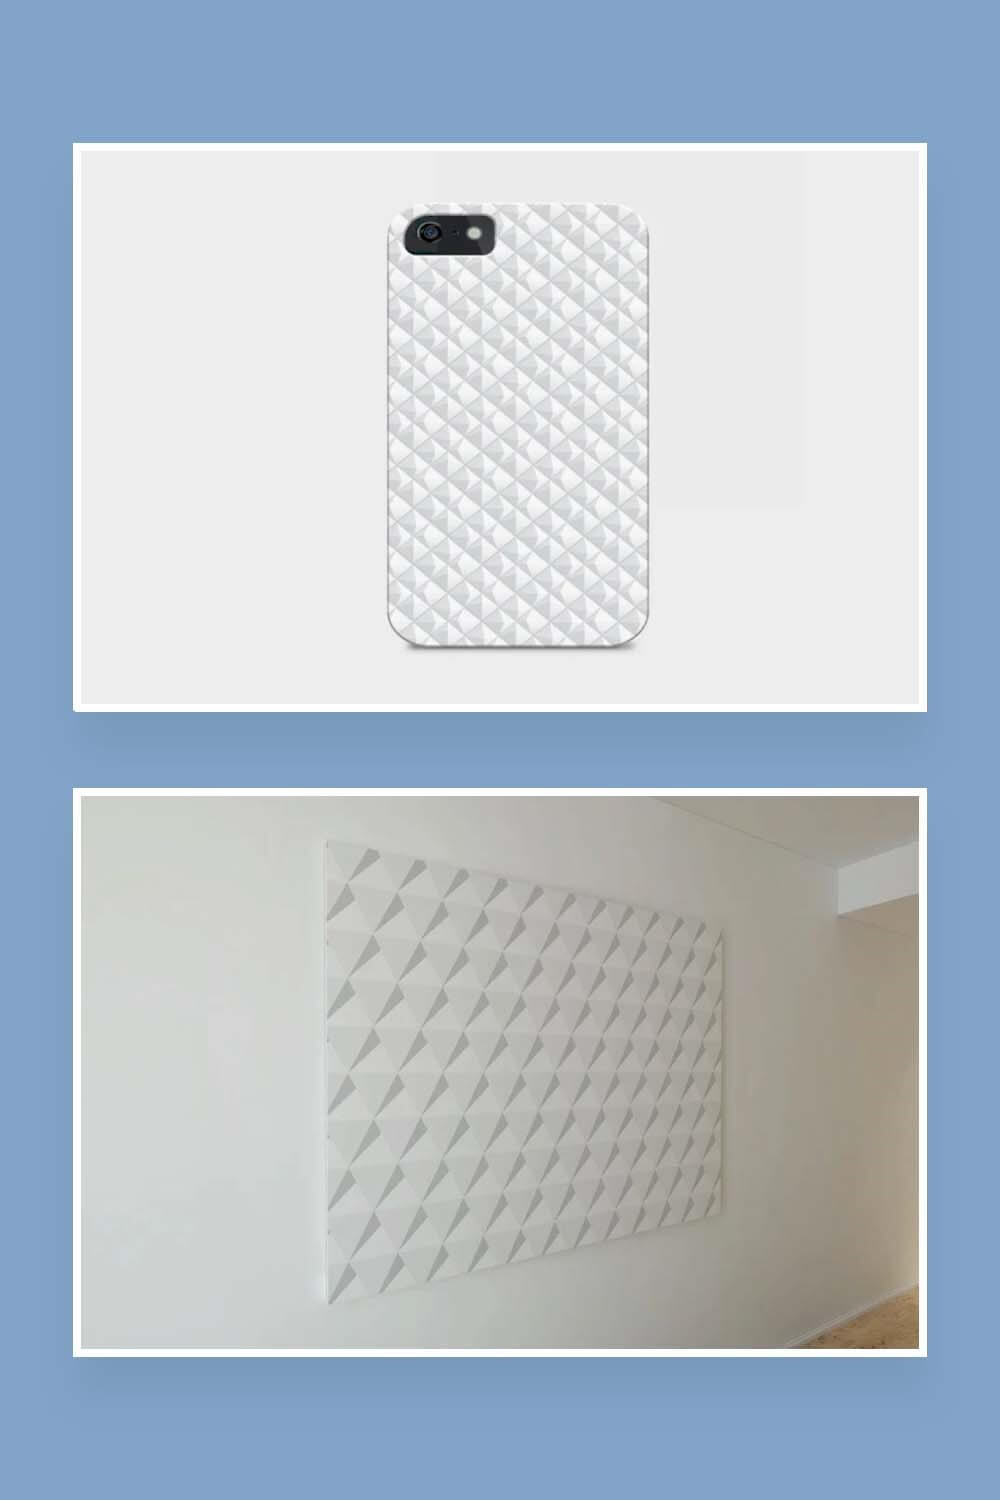 Decorative white seamless texture on phone case and wall.